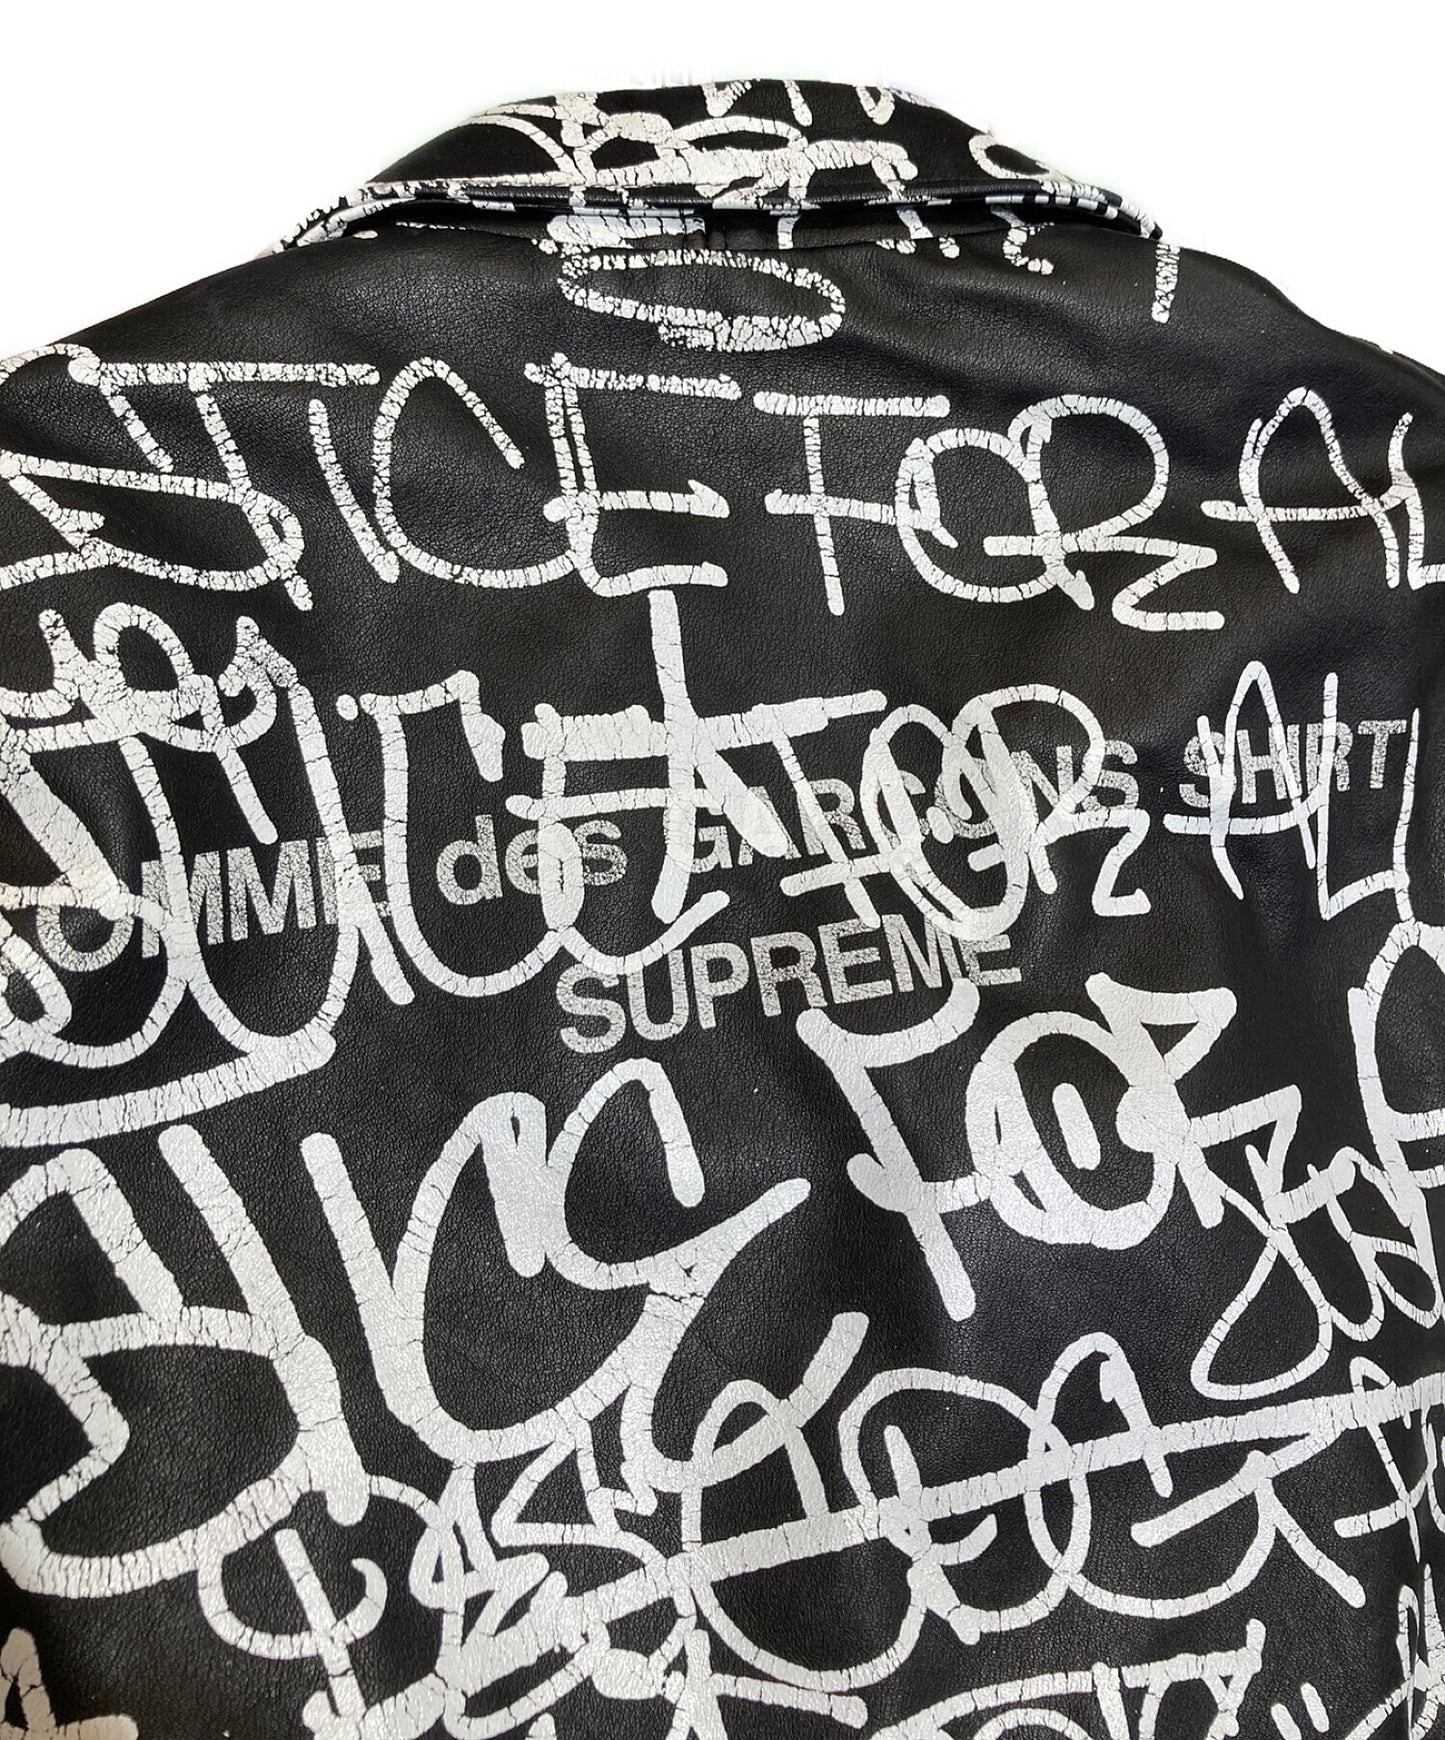 [Pre-owned] Supreme × Comme des Garcons × Schott 18AW Comme des Garcons SHIRT Schott Painted Perfecto Leather Jacket Collaboration Leather Riders Jacket J46F8